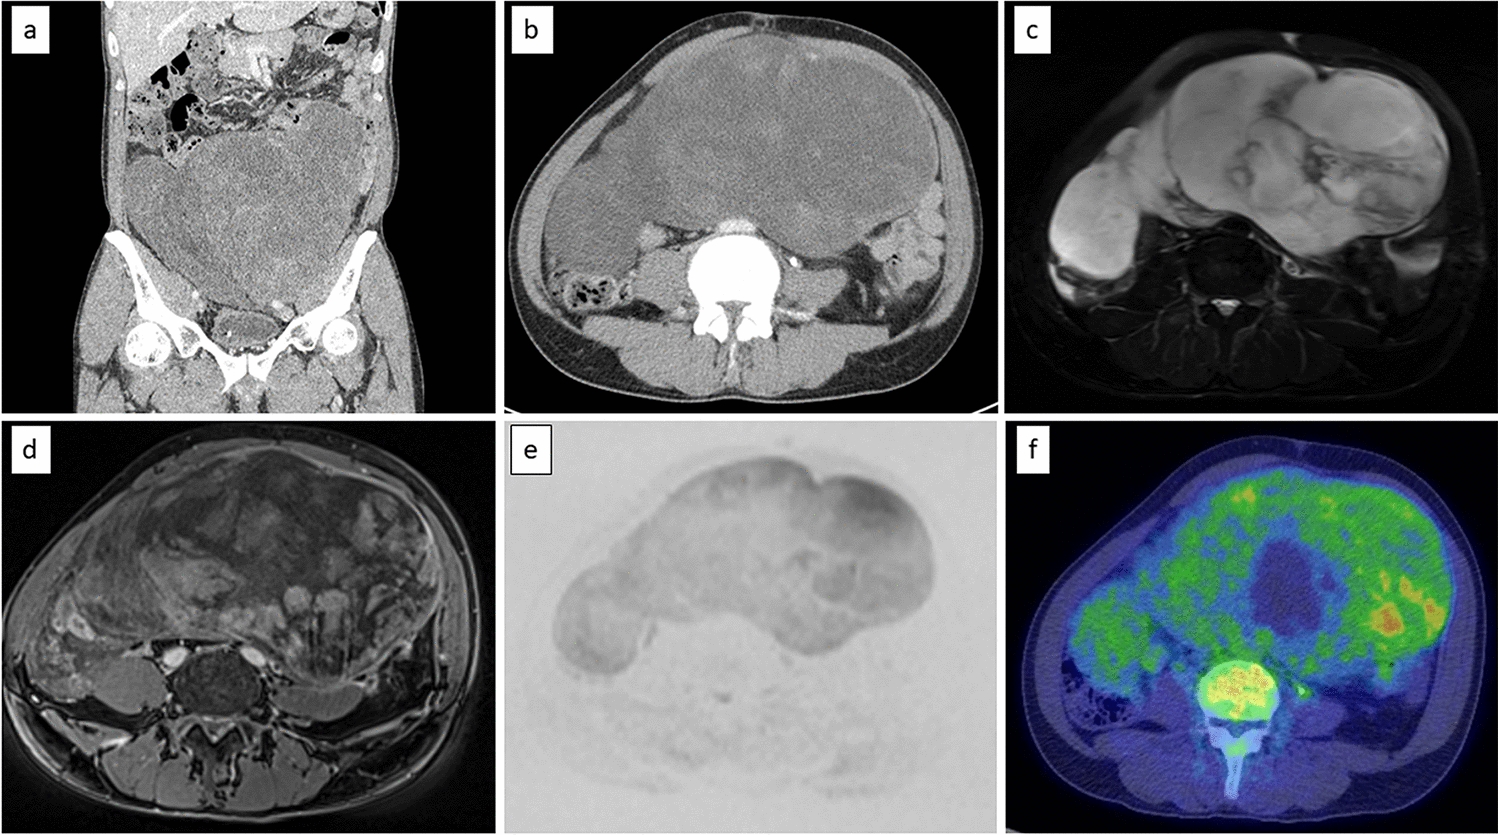 Spot scanning proton therapy for unresectable bulky retroperitoneal dedifferentiated liposarcoma: a case report